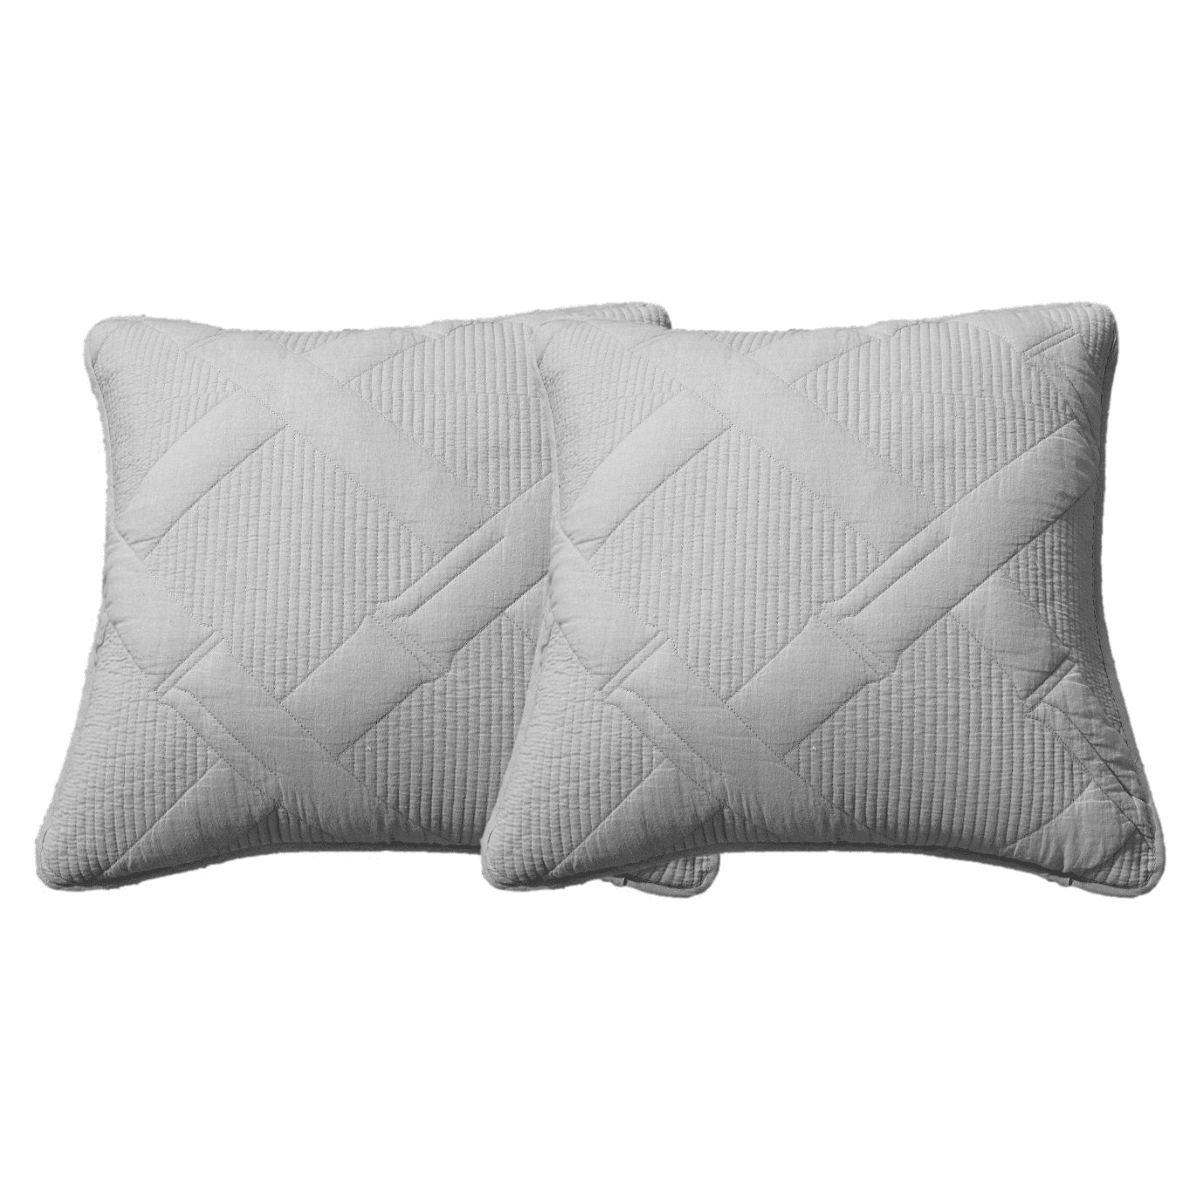 Tache Cotton Light Grey Silver Soothing Pastel Cushion Covers / Euro Sham (JHW-862)